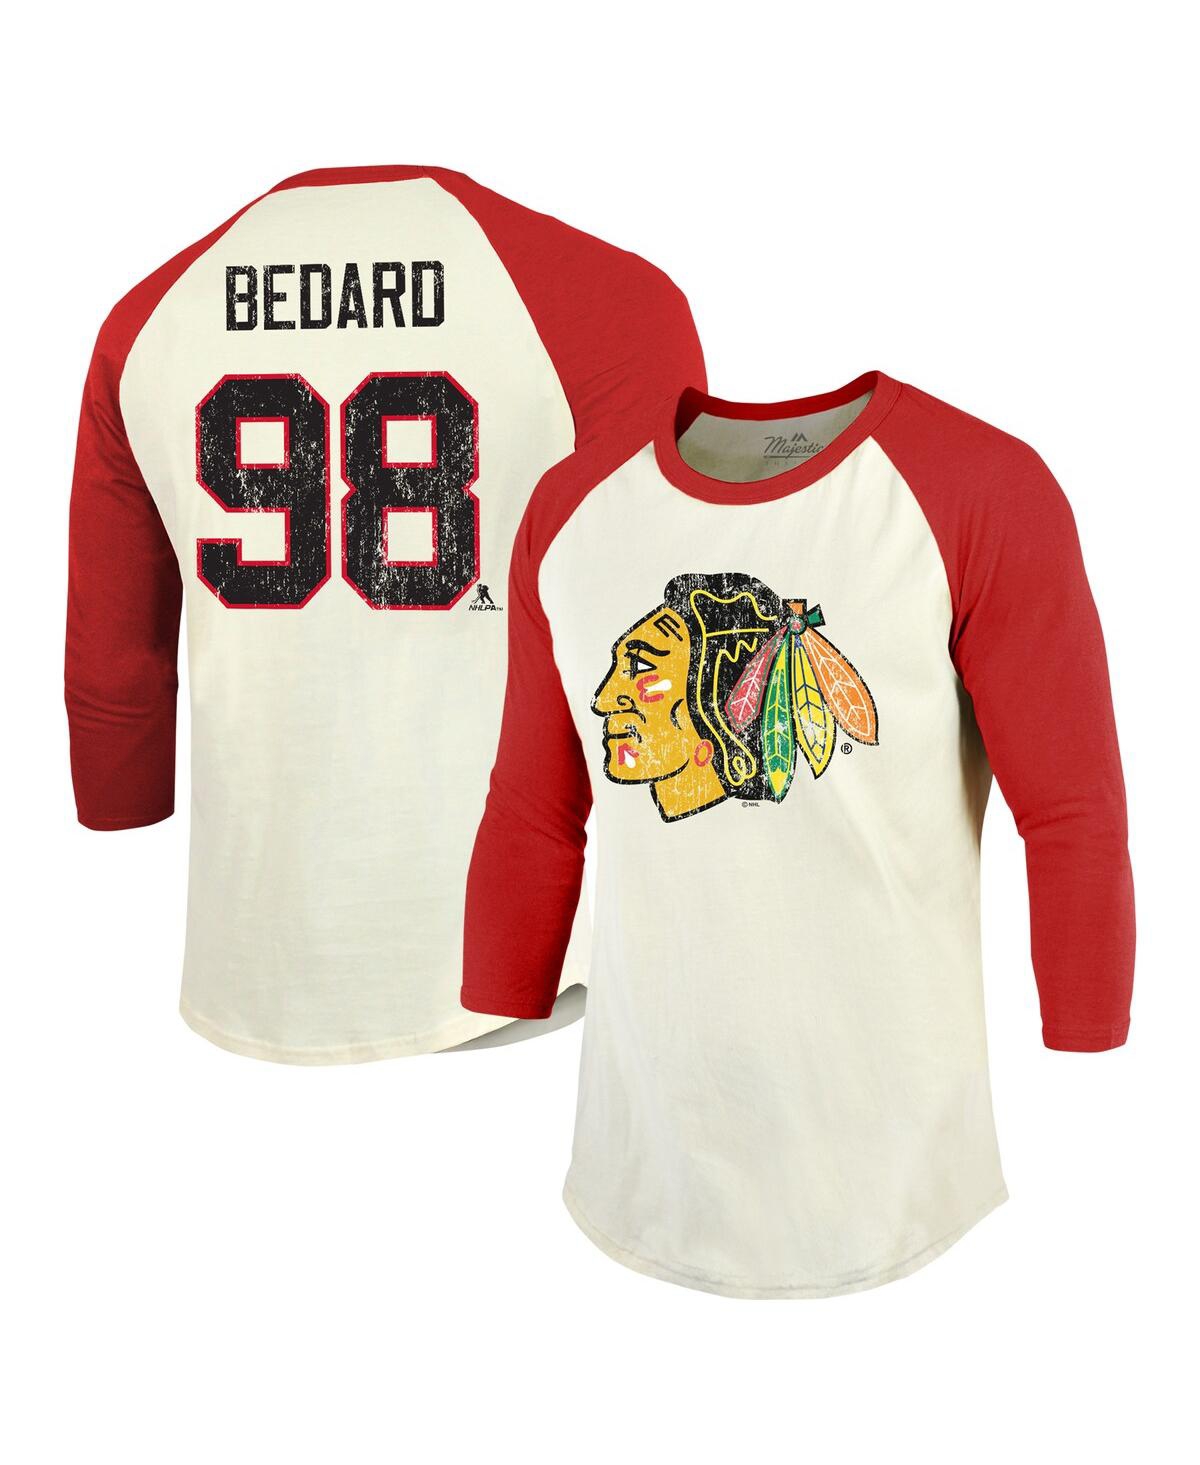 Men's Majestic Threads Connor Bedard Cream, Red Distressed Chicago Blackhawks Name and Number Softhand Raglan 3/4-Sleeve T-shirt - Cream, Red